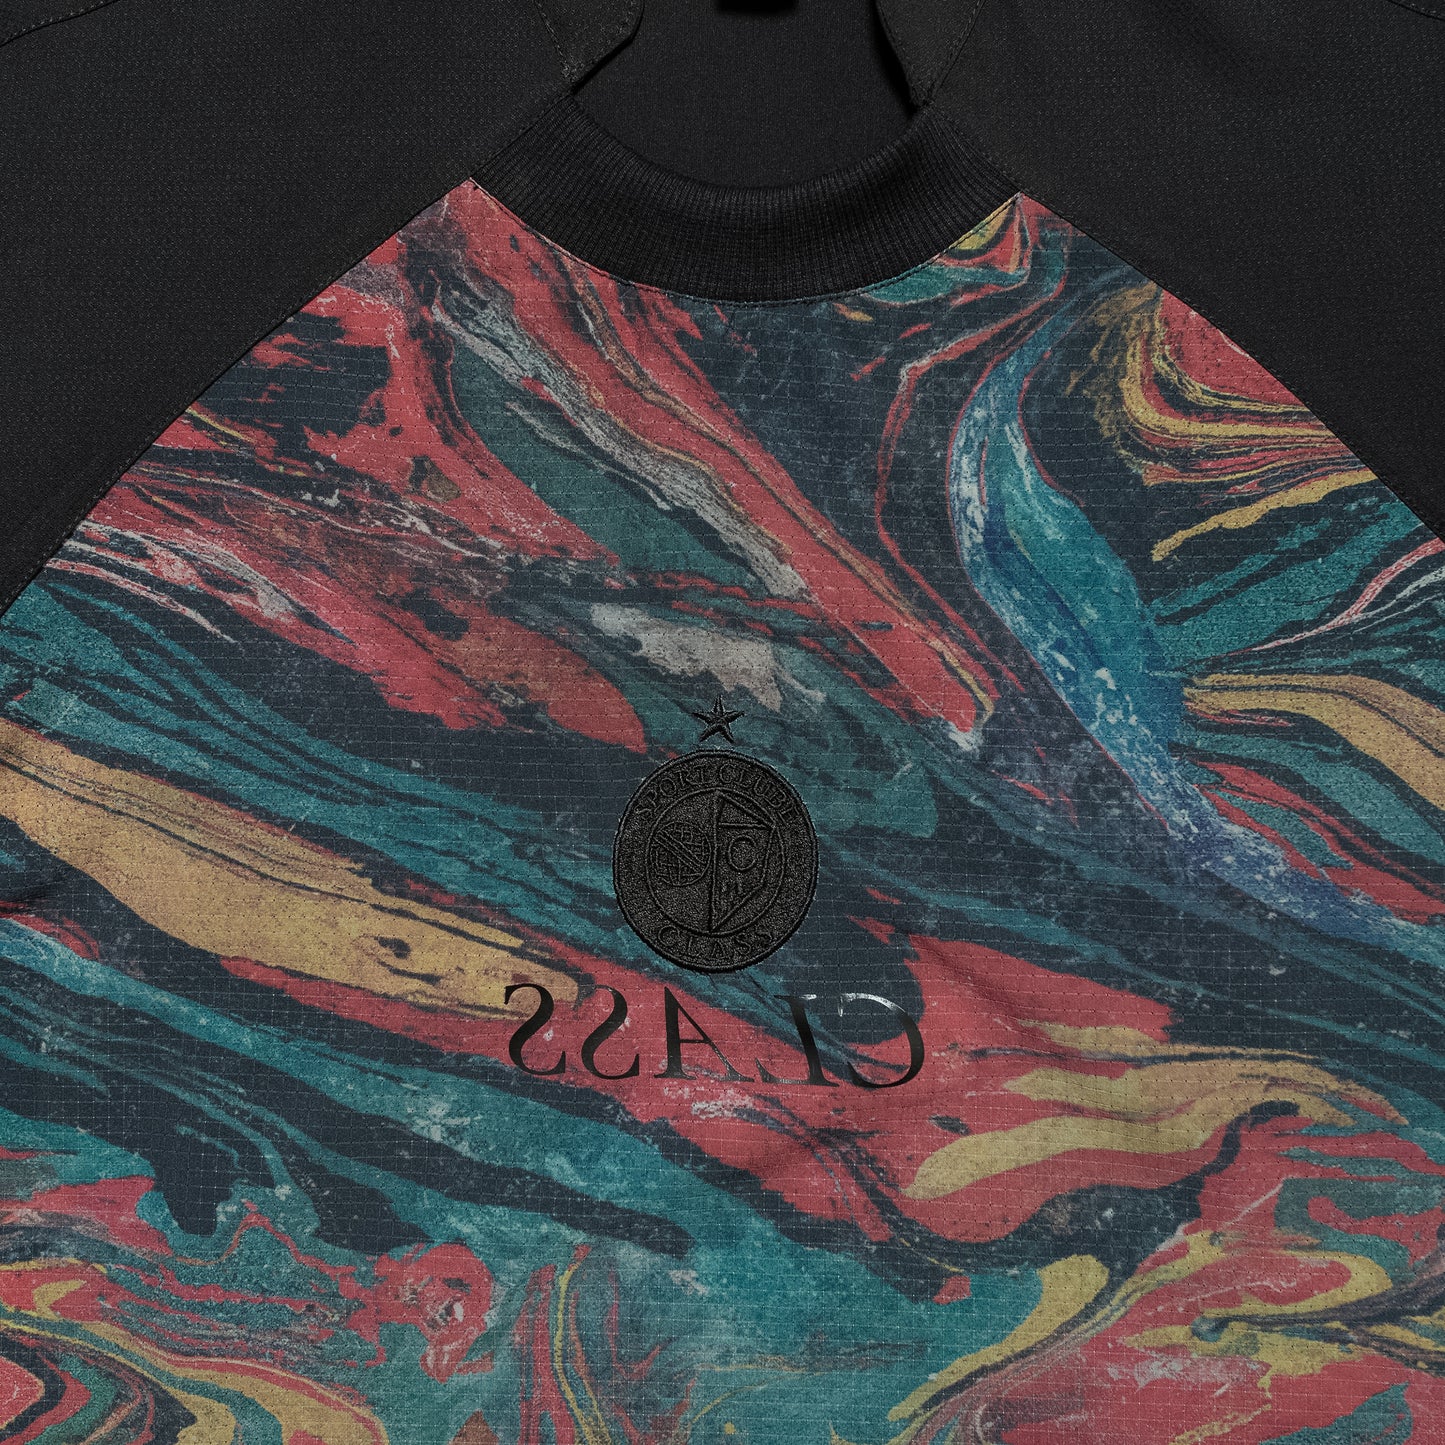 T-Shirt "Marble Jersey" Black & Colorful